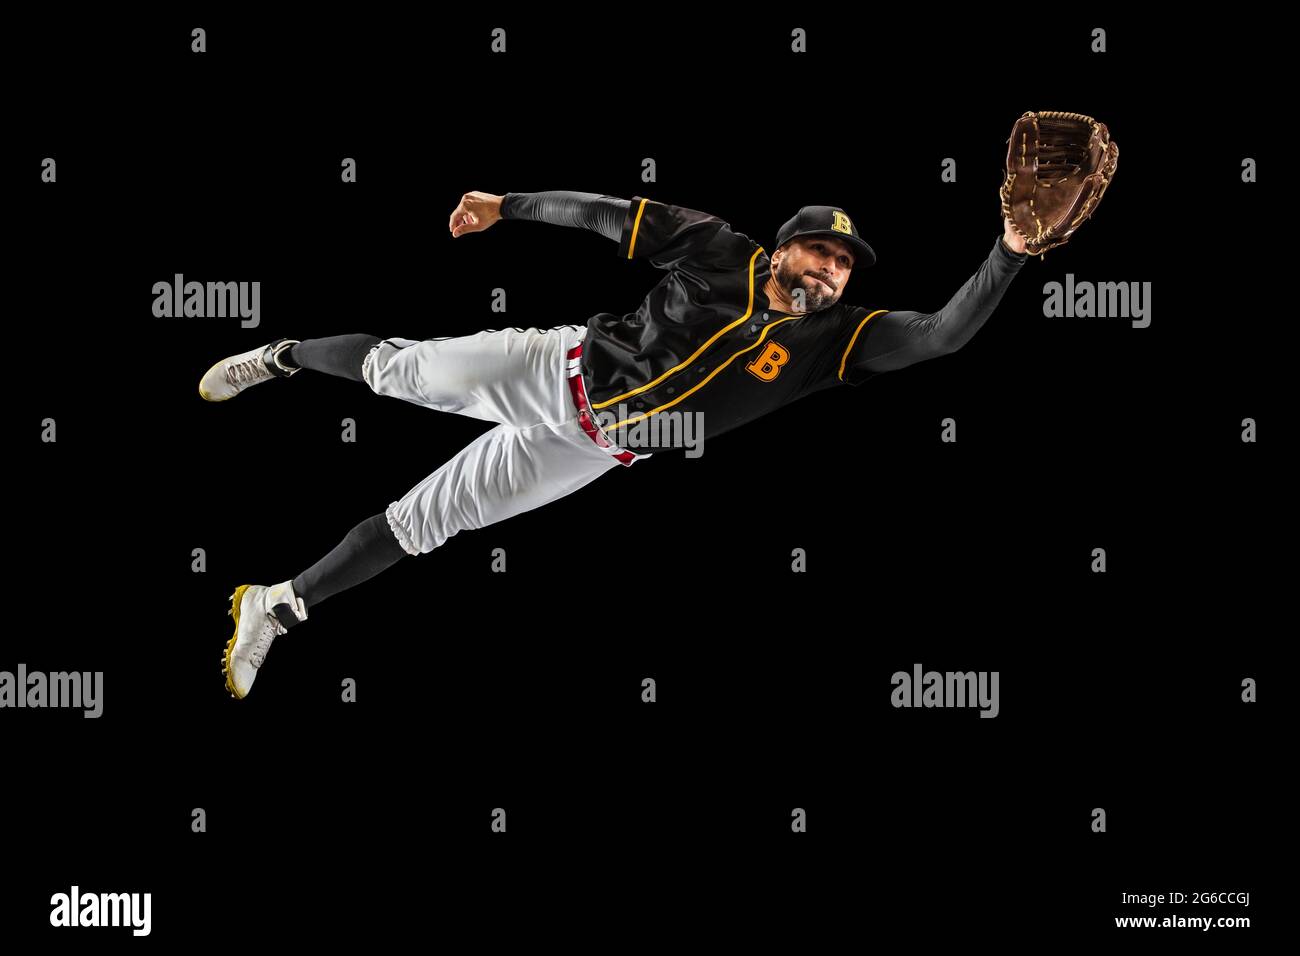 Flying. Baseball player, catcher in sports uniform and equipment practicing isolated on a black studio background. Team sport concept Stock Photo